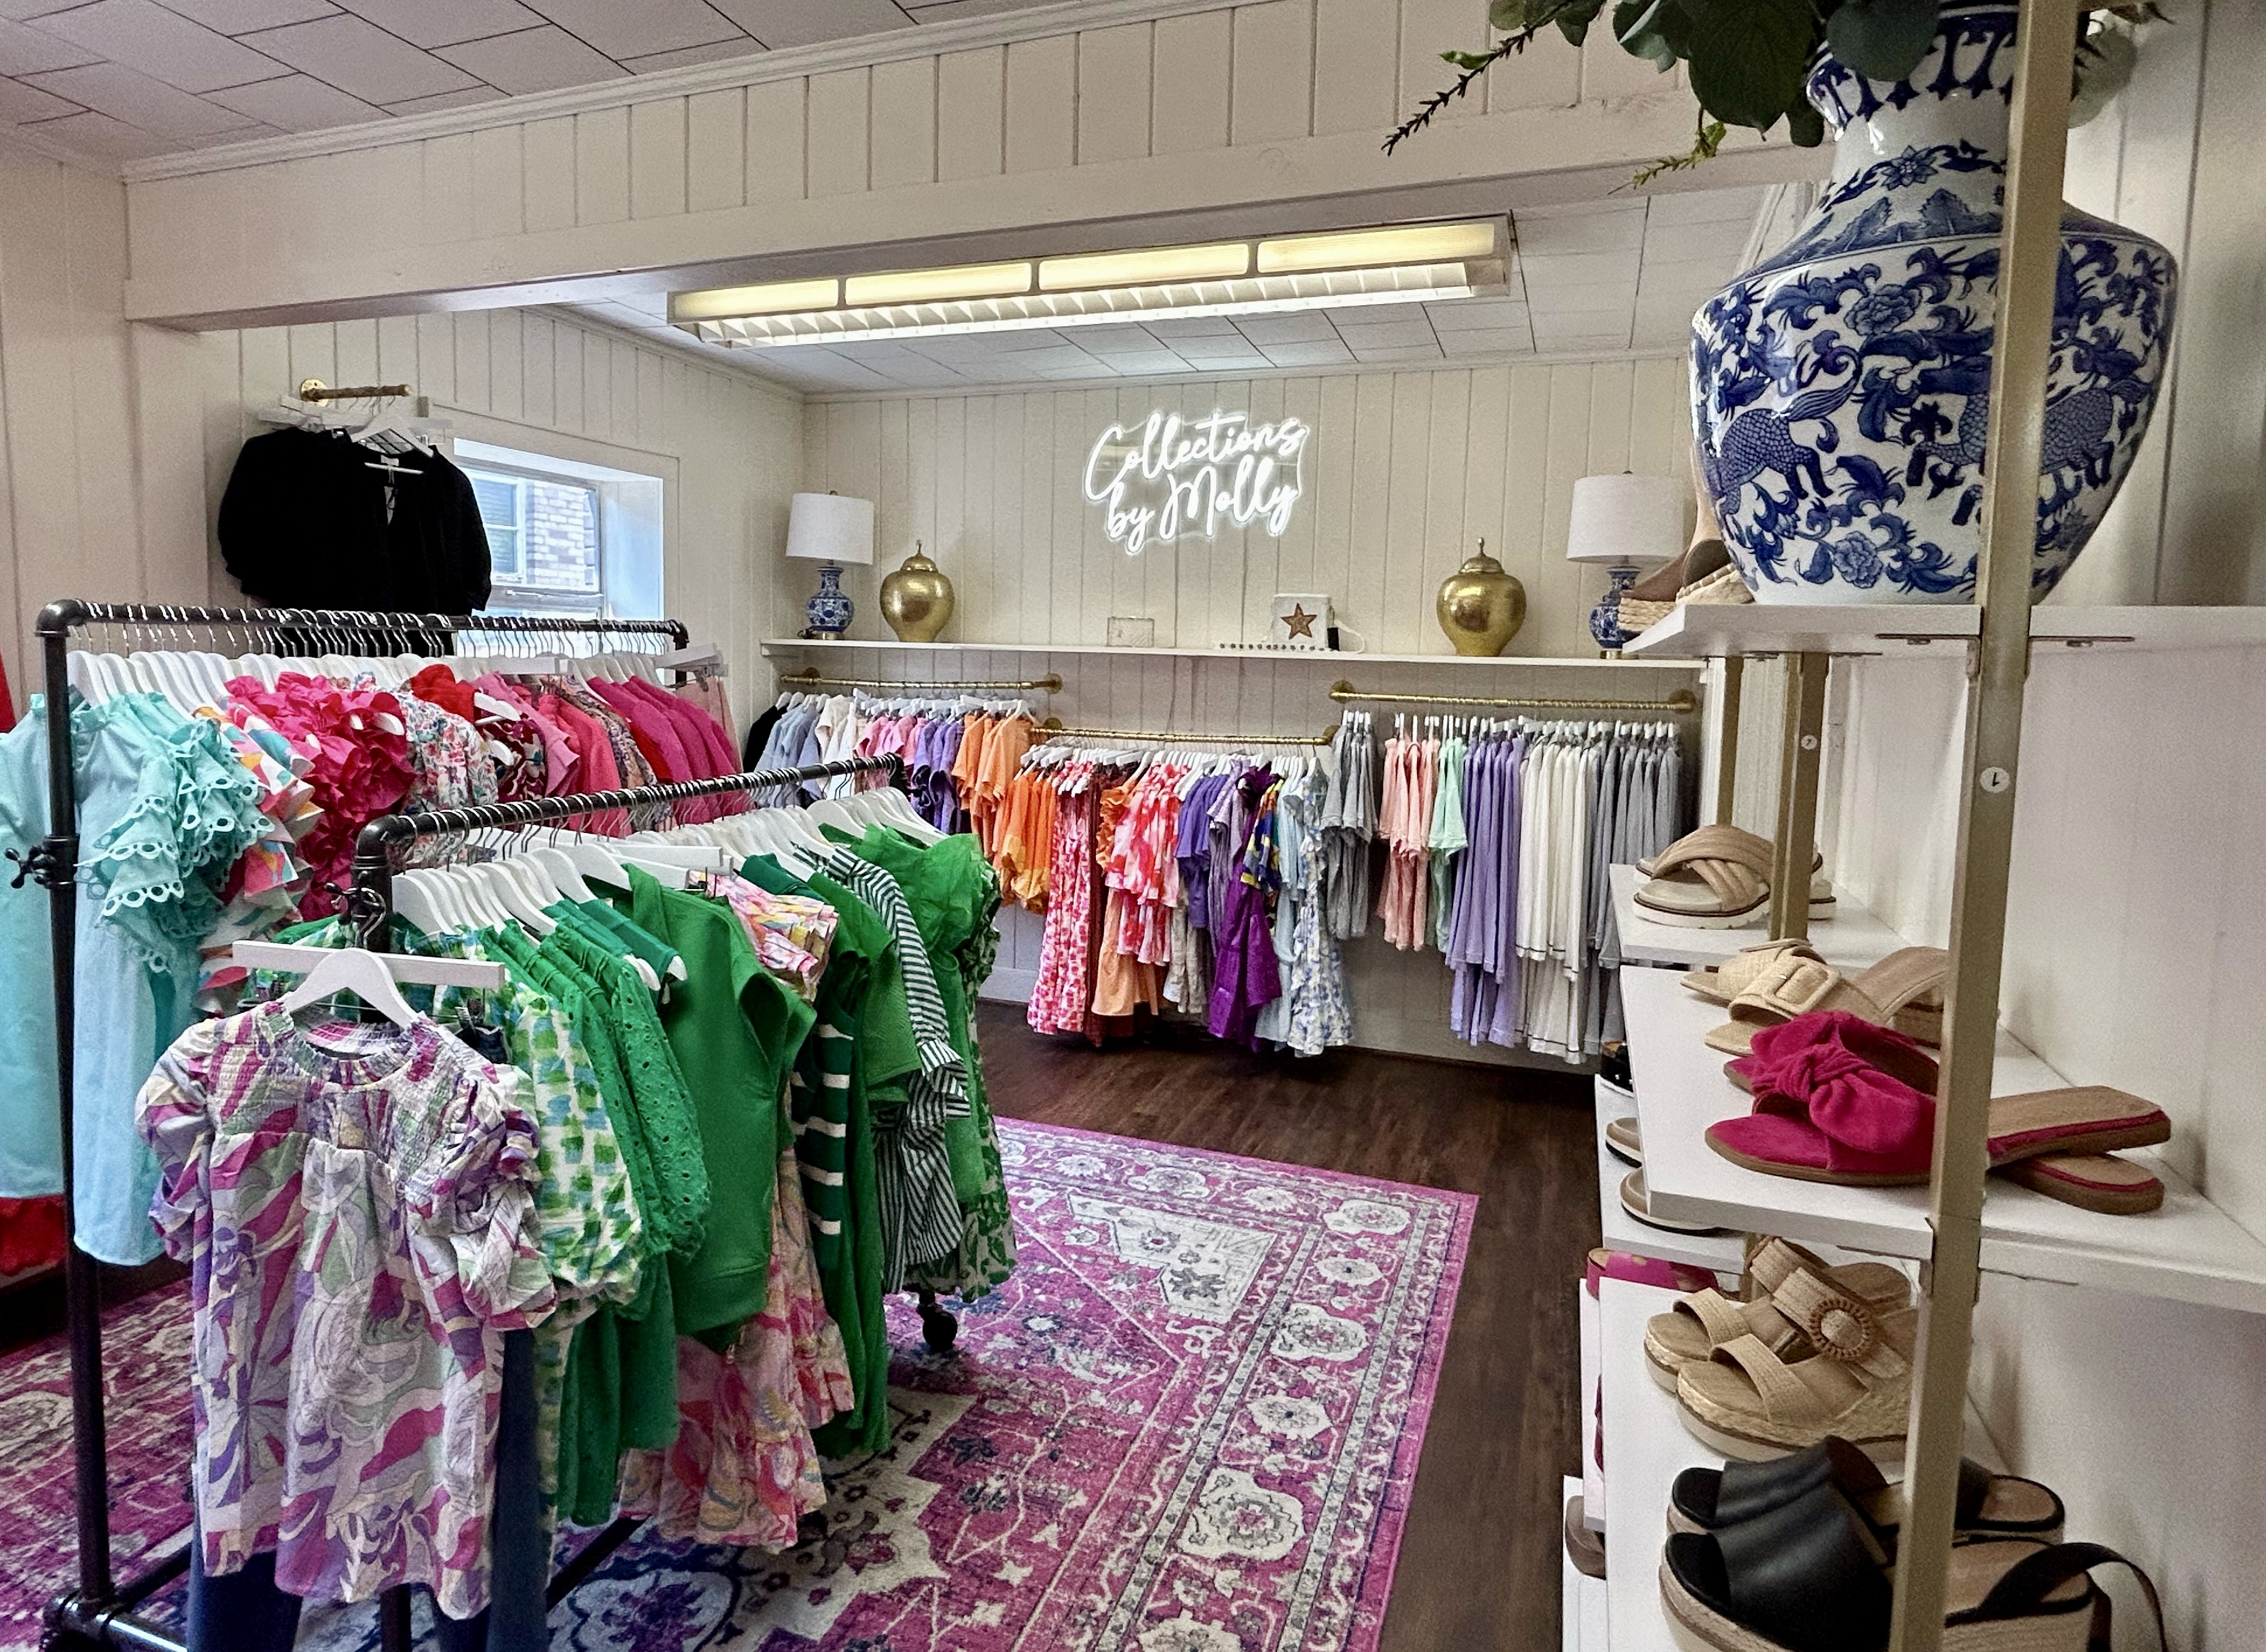 Shoes, handbags, dresses and more can be found at the Camden boutique.